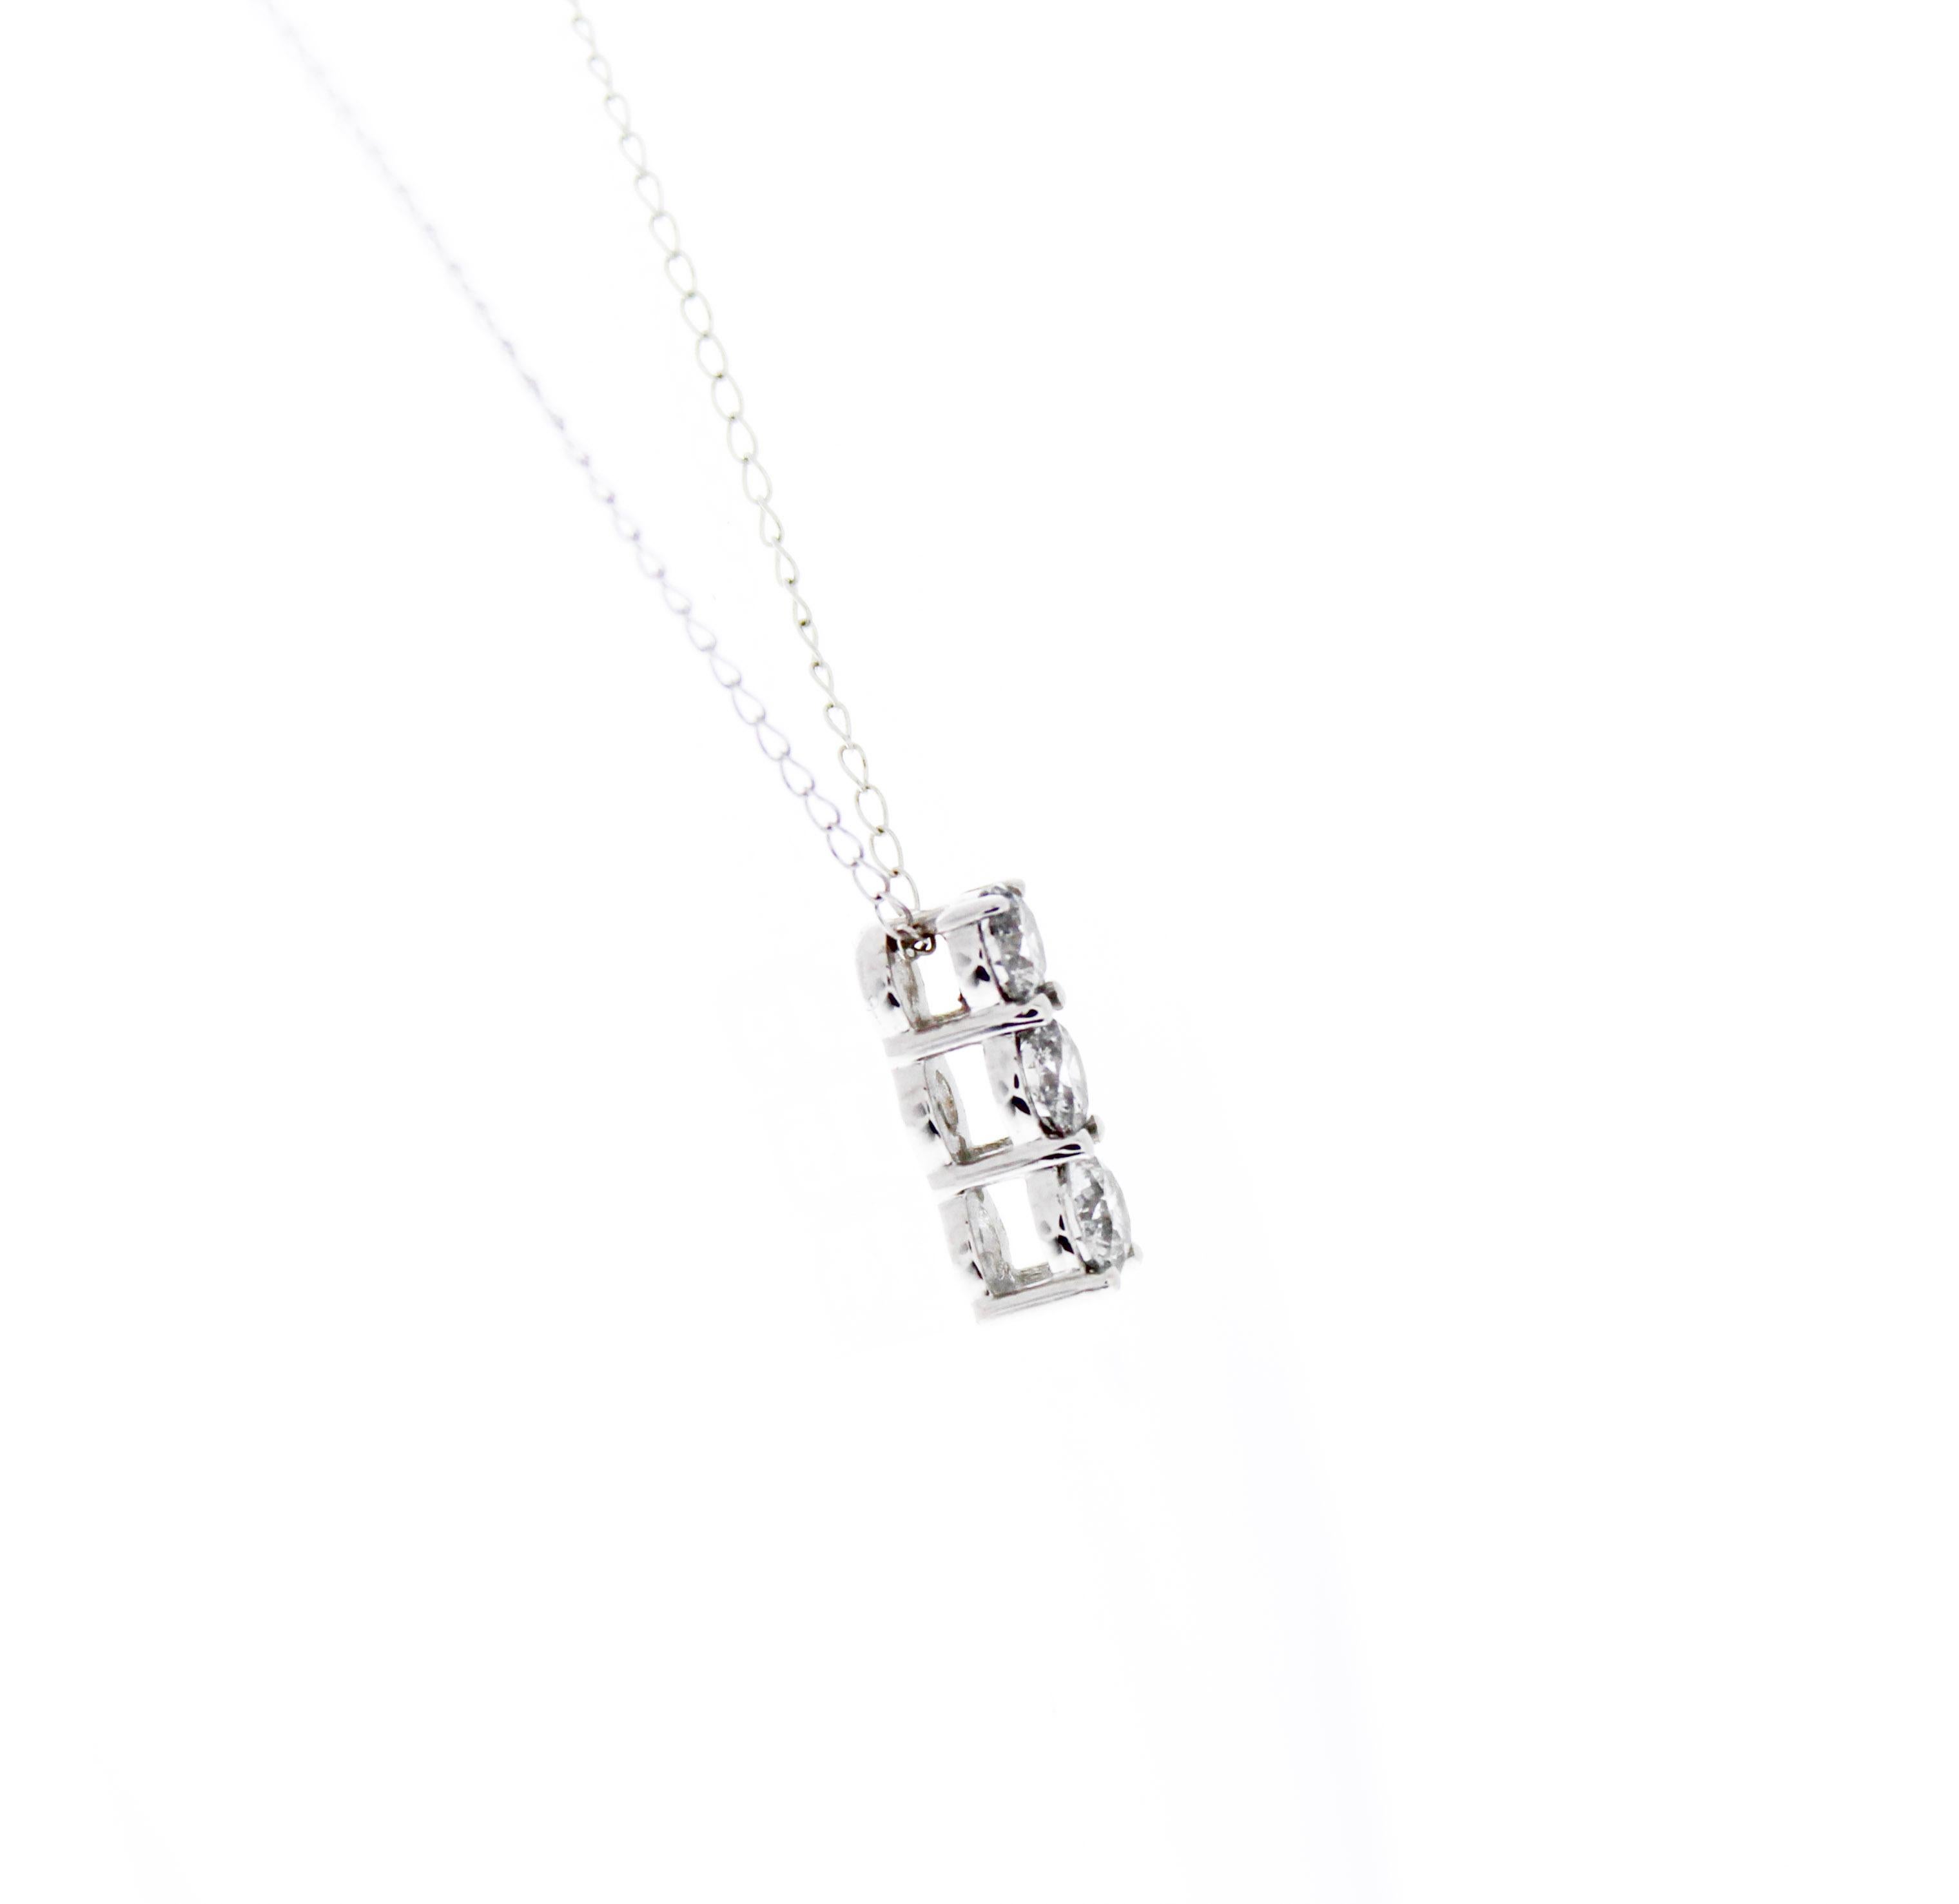 This impressive three-stone round diamond pendant is finely crafted in brightly polished 14 karat white gold and features three stones totaling a carat weight of 2.00CTW. These diamonds are I1 clarity. Ideal as an anniversary or birthday present,